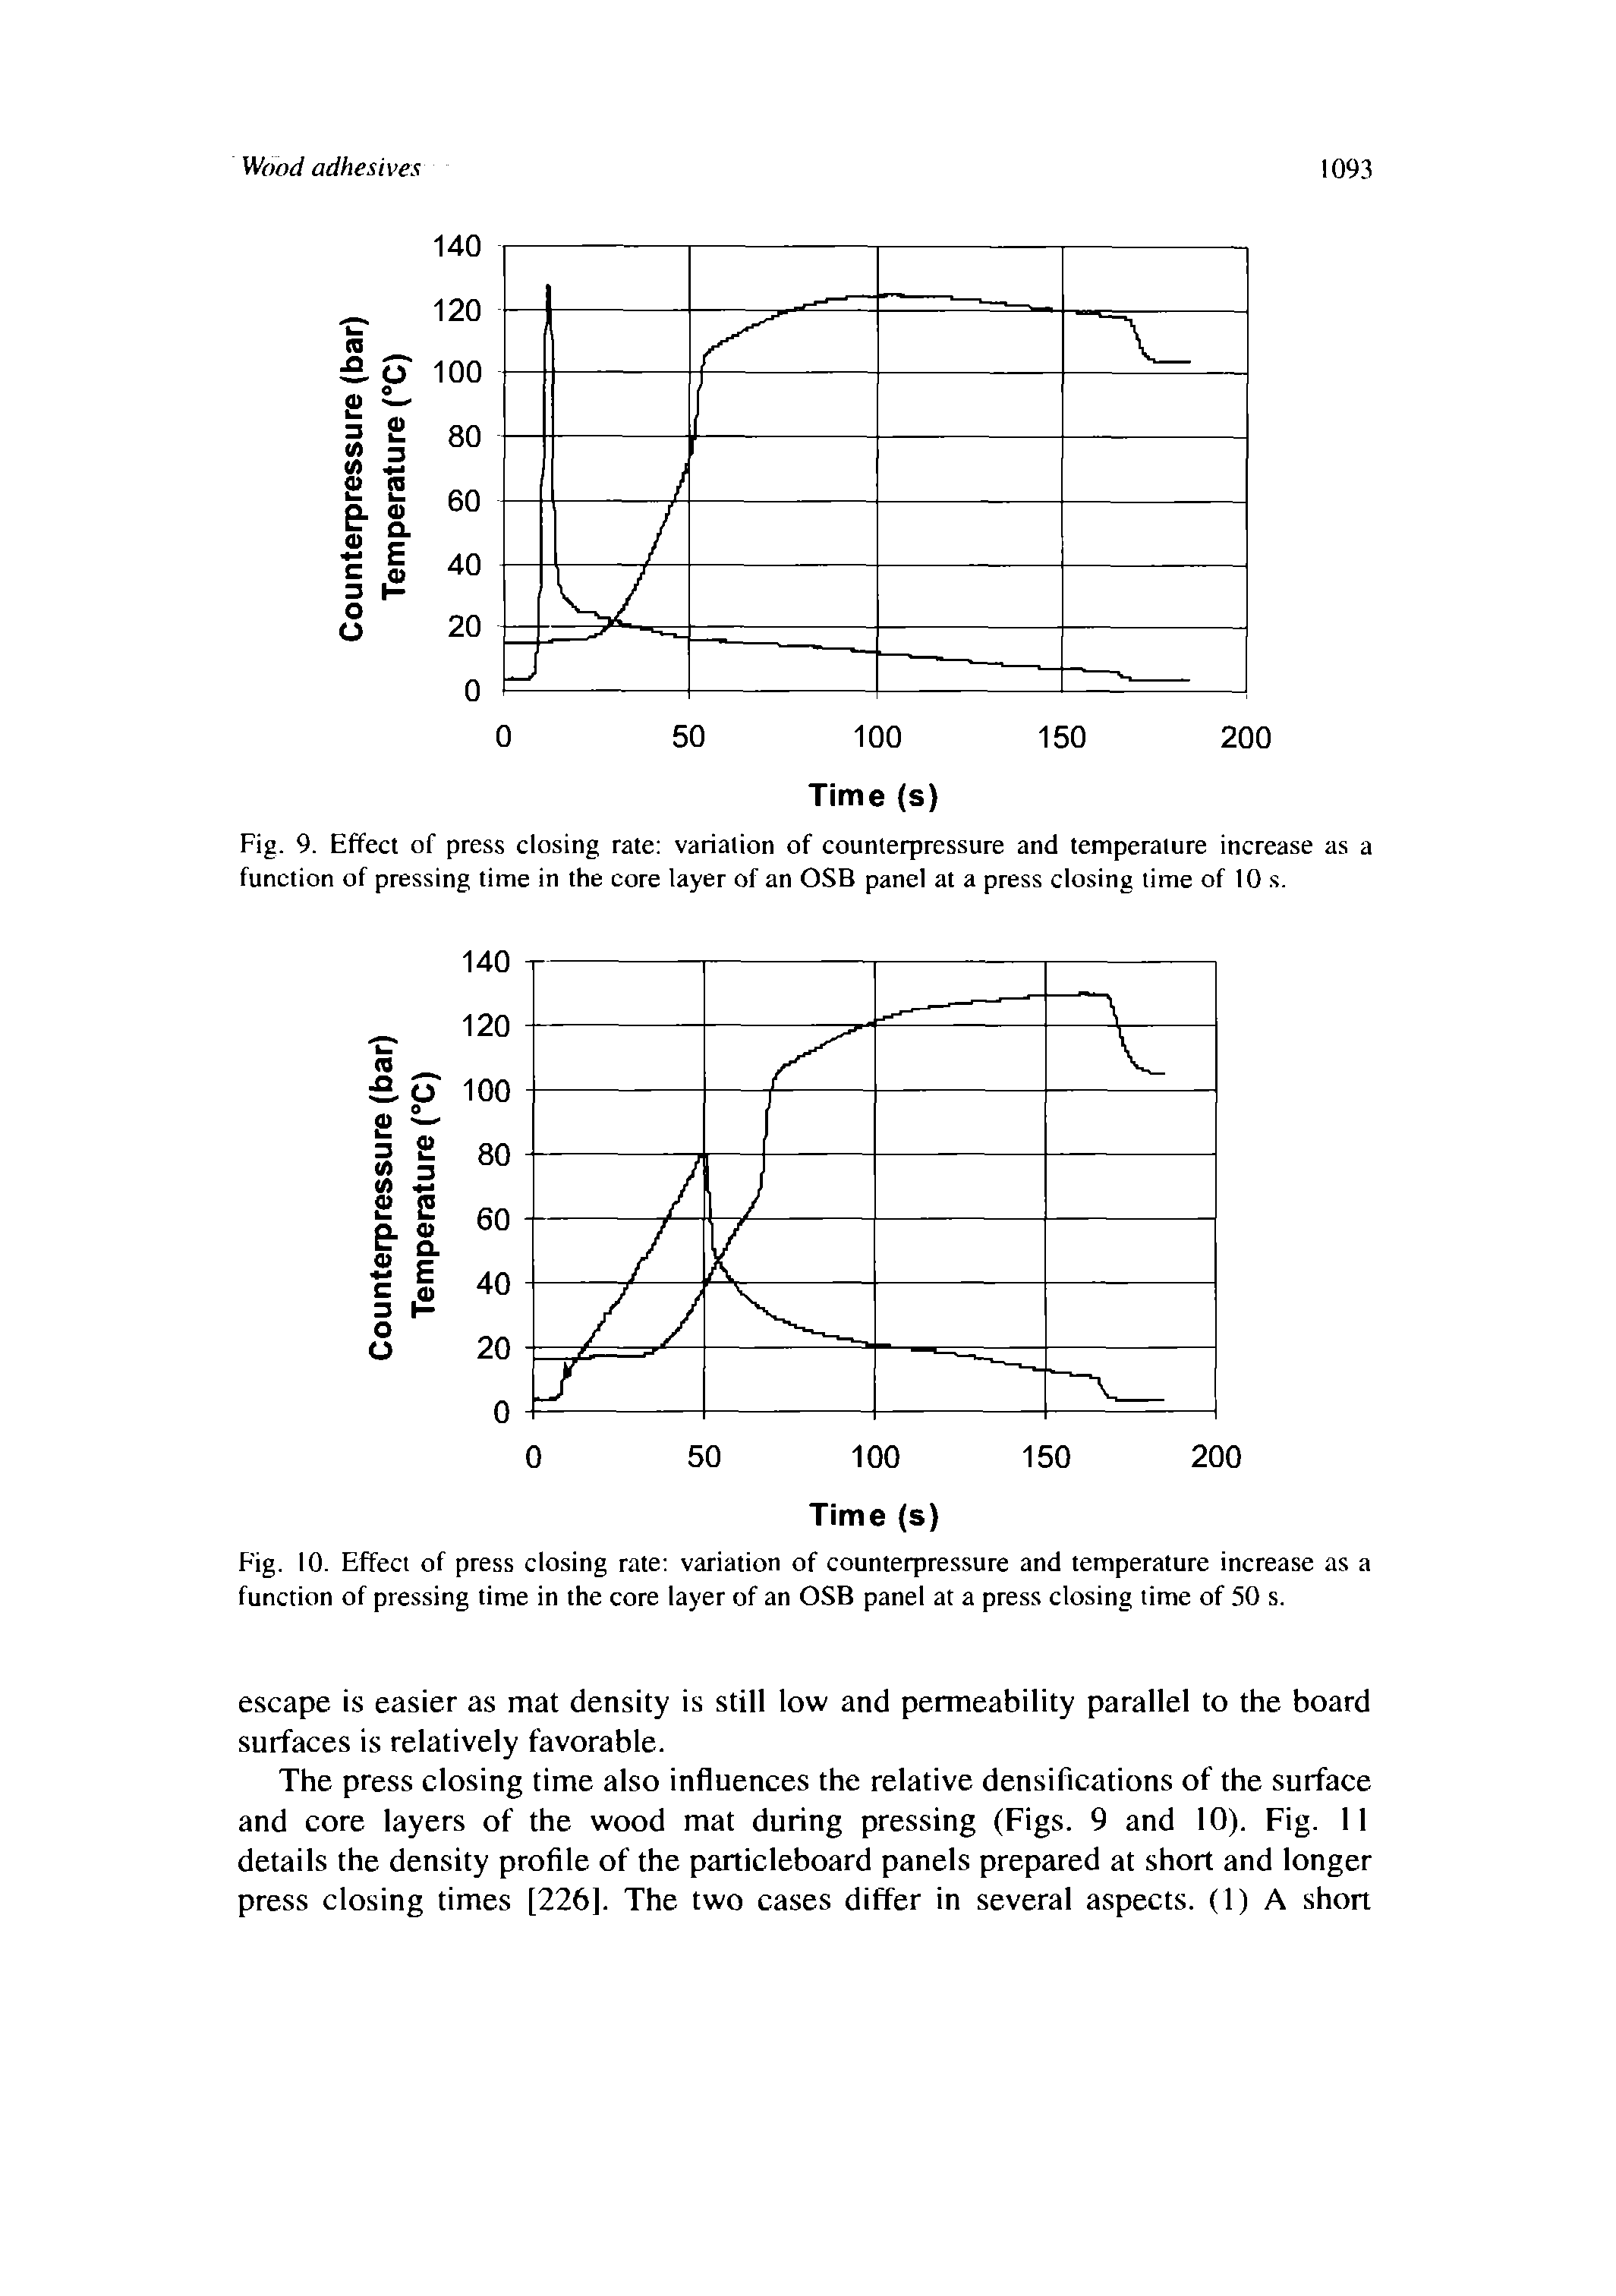 Fig. 9. Effect of press closing rate variation of counterpressure and temperature increase as a function of pressing time in the core layer of an OSB panel at a press closing lime of 10 s.